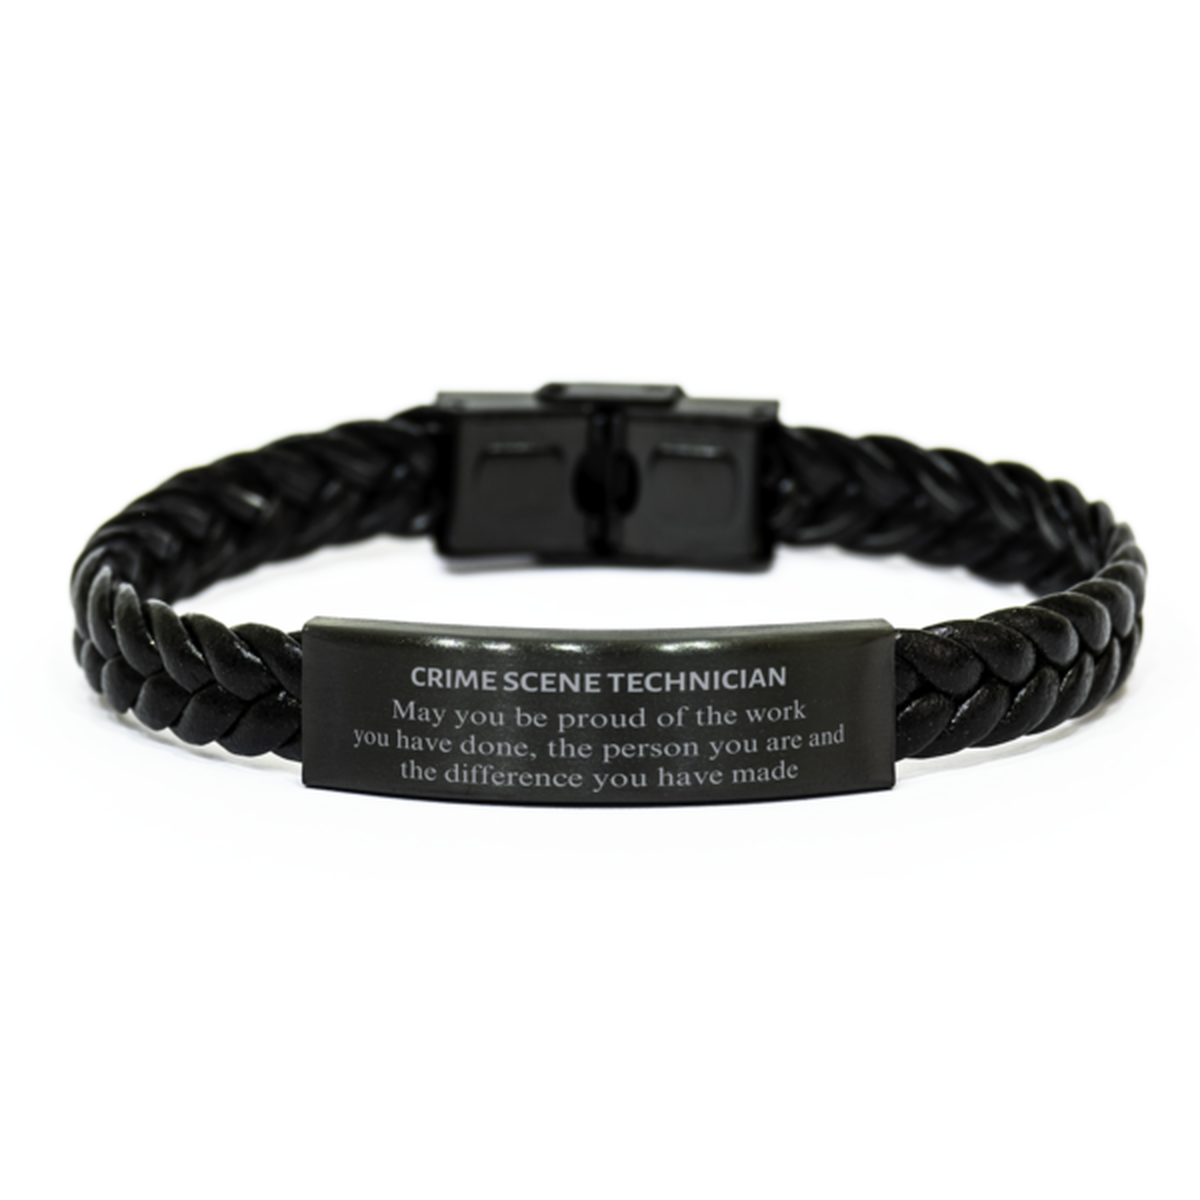 Crime Scene Technician May you be proud of the work you have done, Retirement Crime Scene Technician Braided Leather Bracelet for Colleague Appreciation Gifts Amazing for Crime Scene Technician